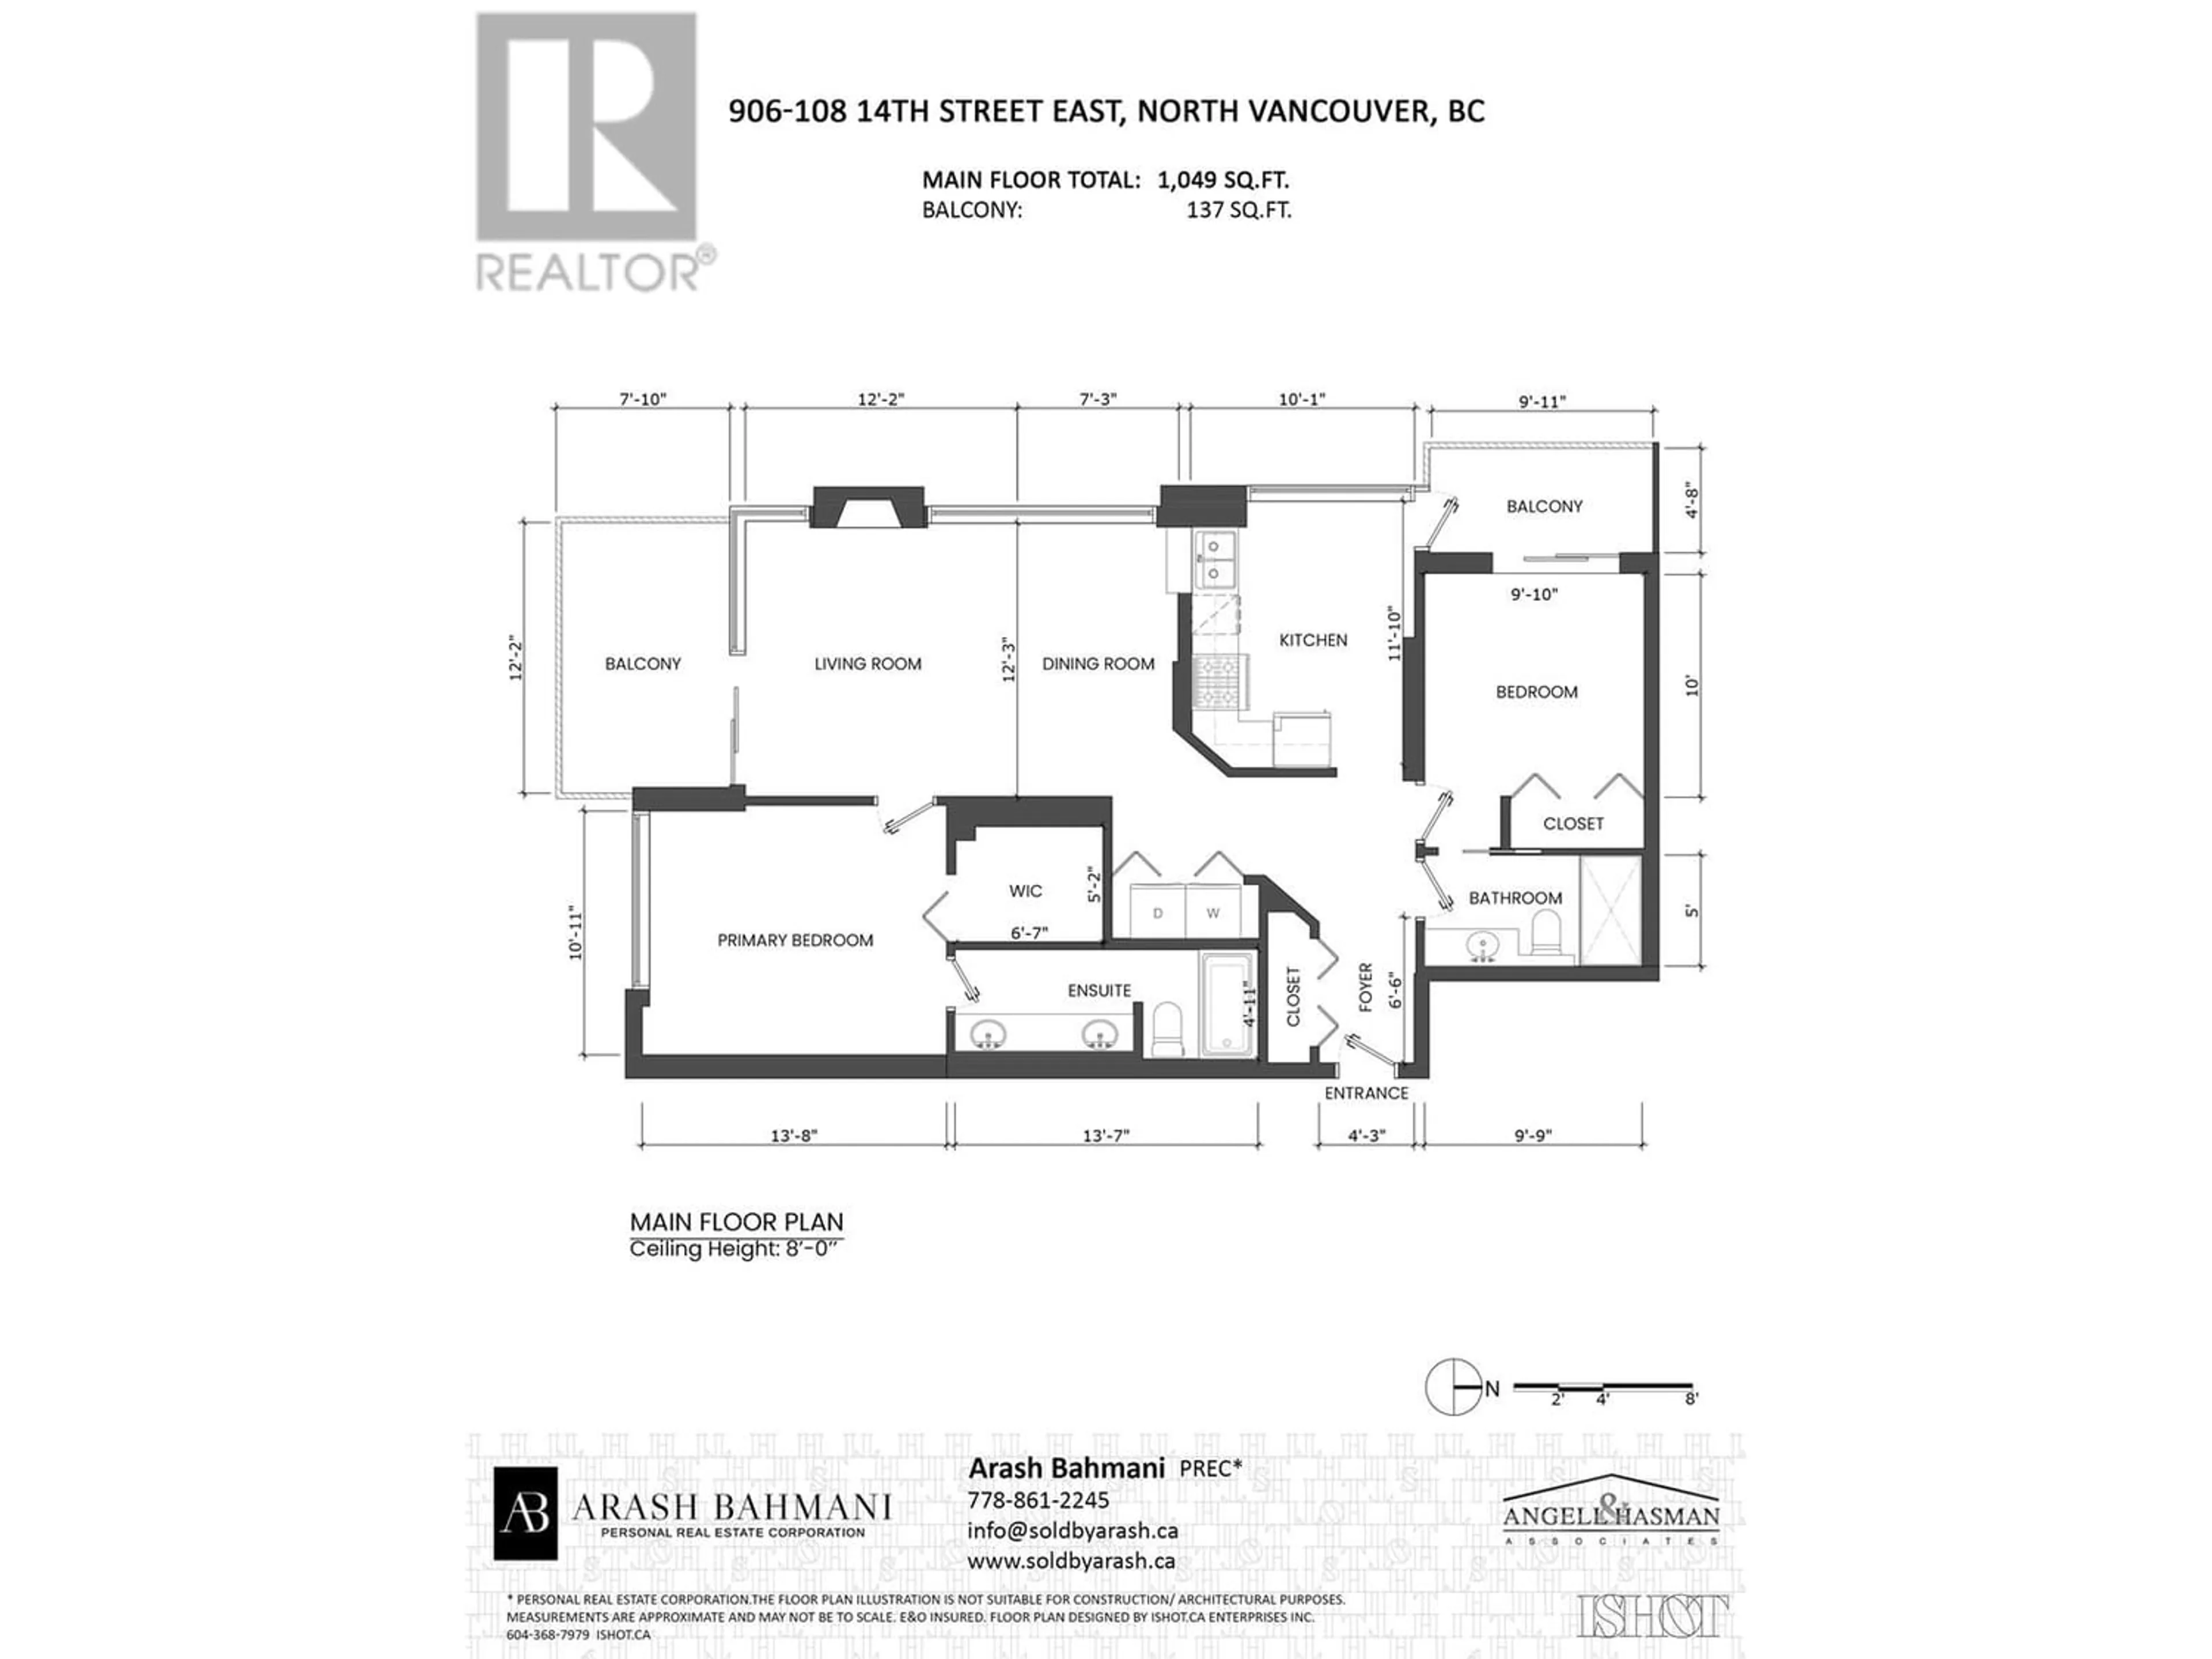 Floor plan for 906 108 E 14TH STREET, North Vancouver British Columbia V7L2N3